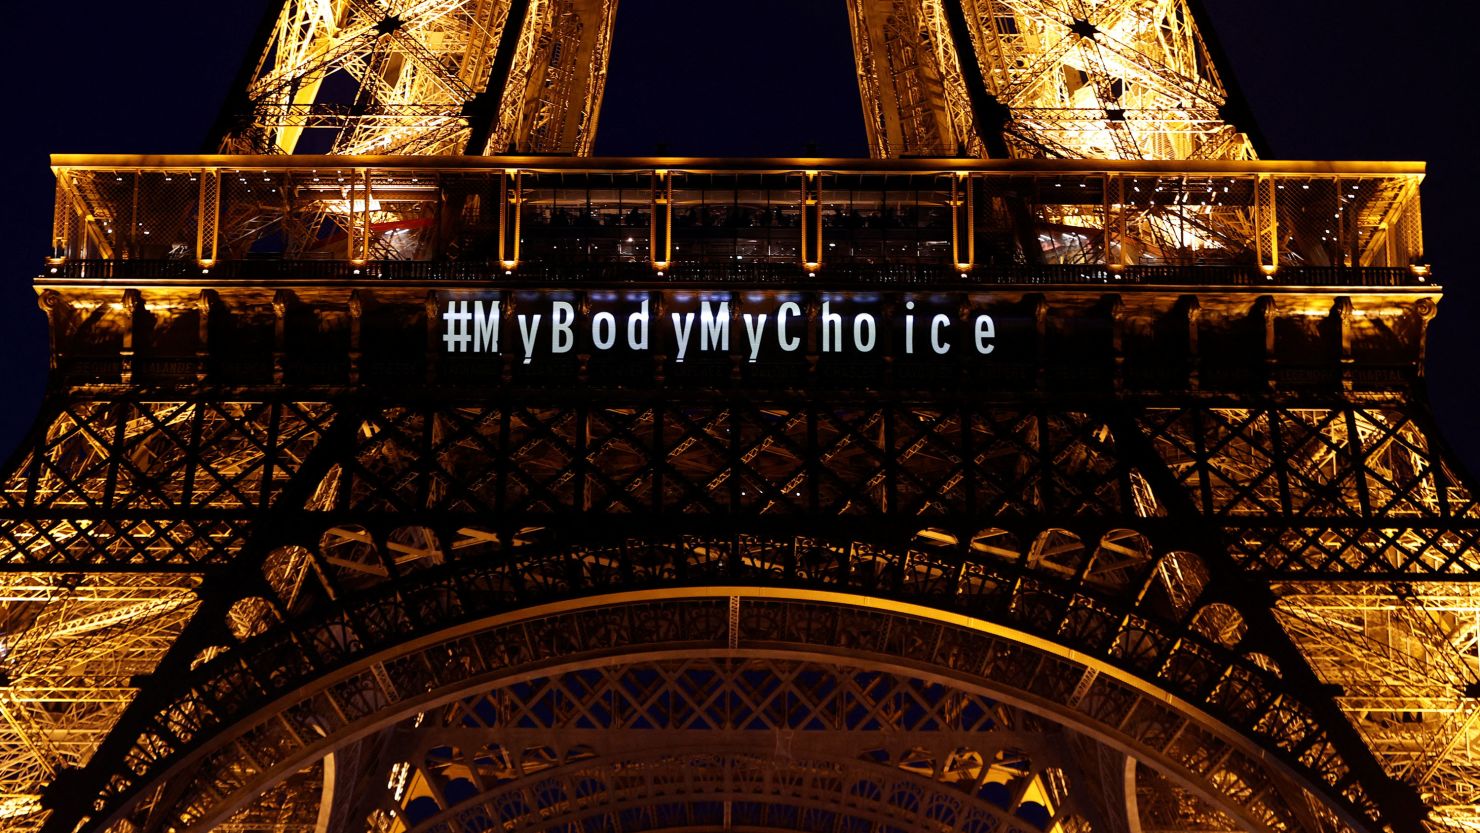 The Eiffel Tower lights up with the message "My body My choice" after French lawmakers enshrined the right to abortion in the constitution on March 4.